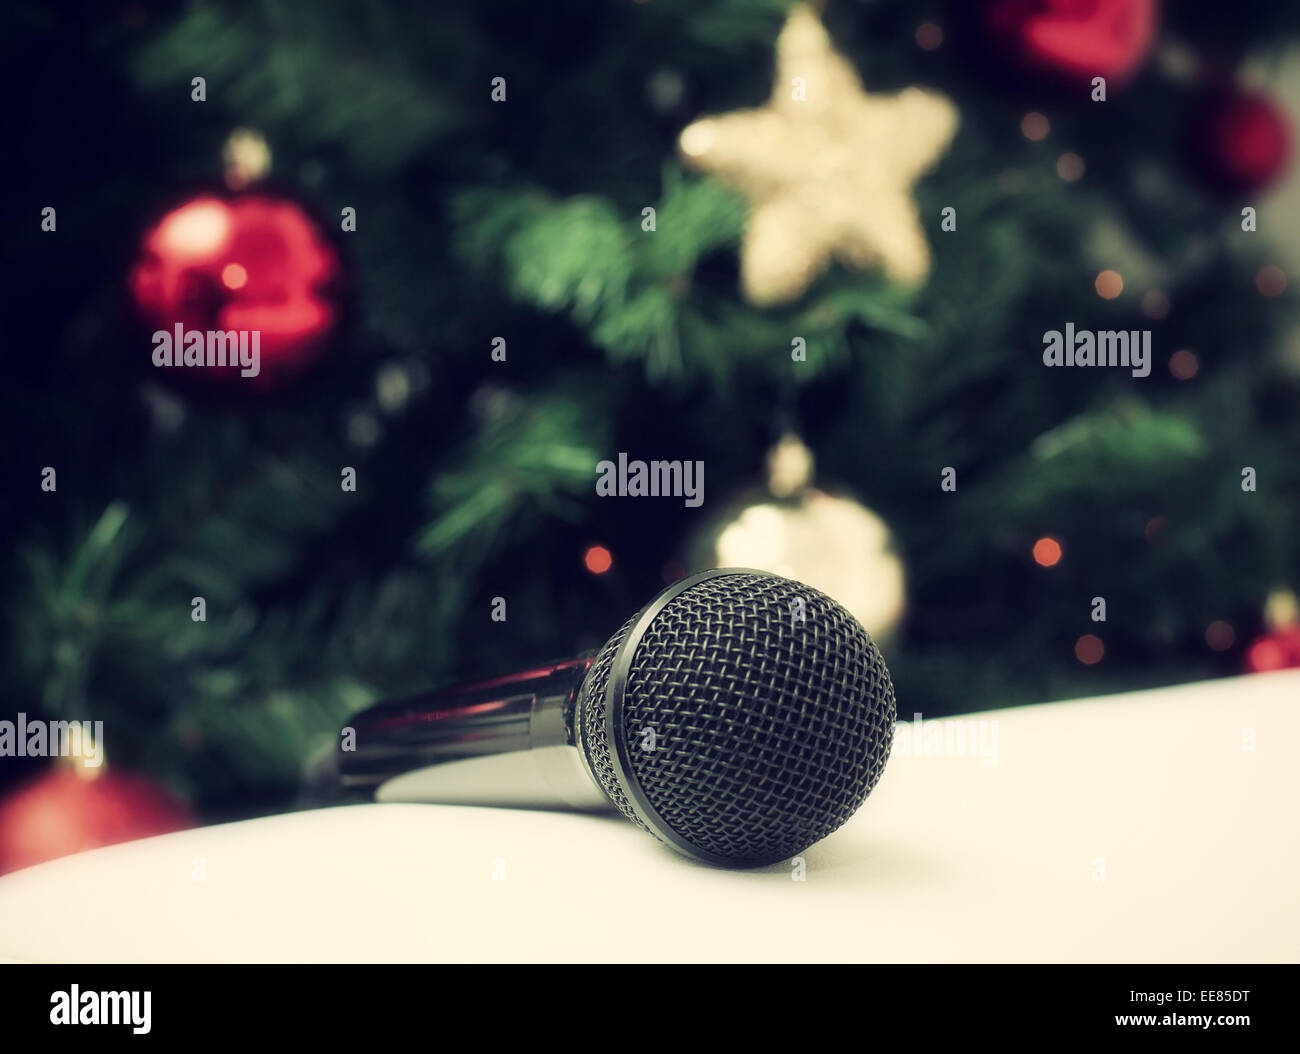 Black microphone on white leather sofa near the Christmas tree. Concept of Christmas song music. Stock Photo